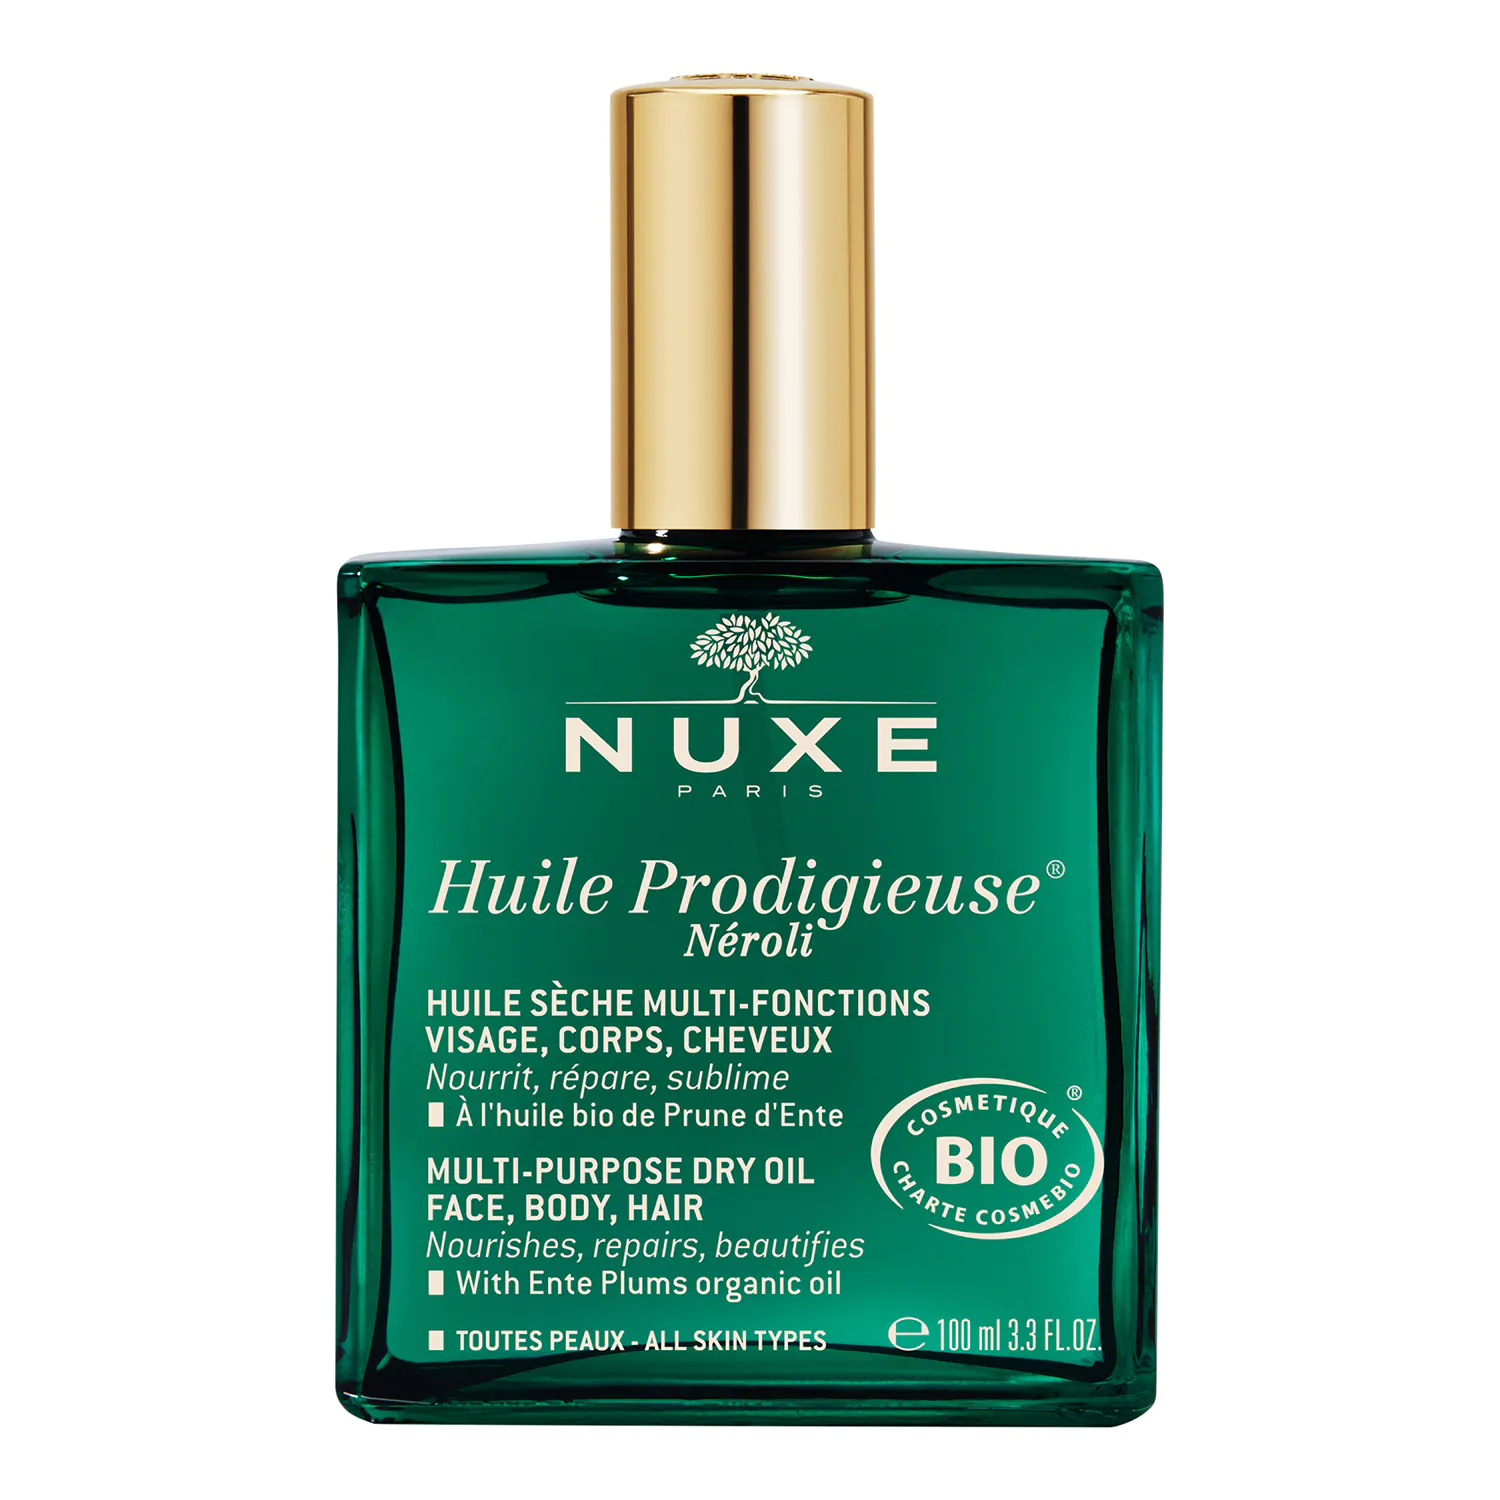 Prodigieux Huile Nuxe organic dry oil